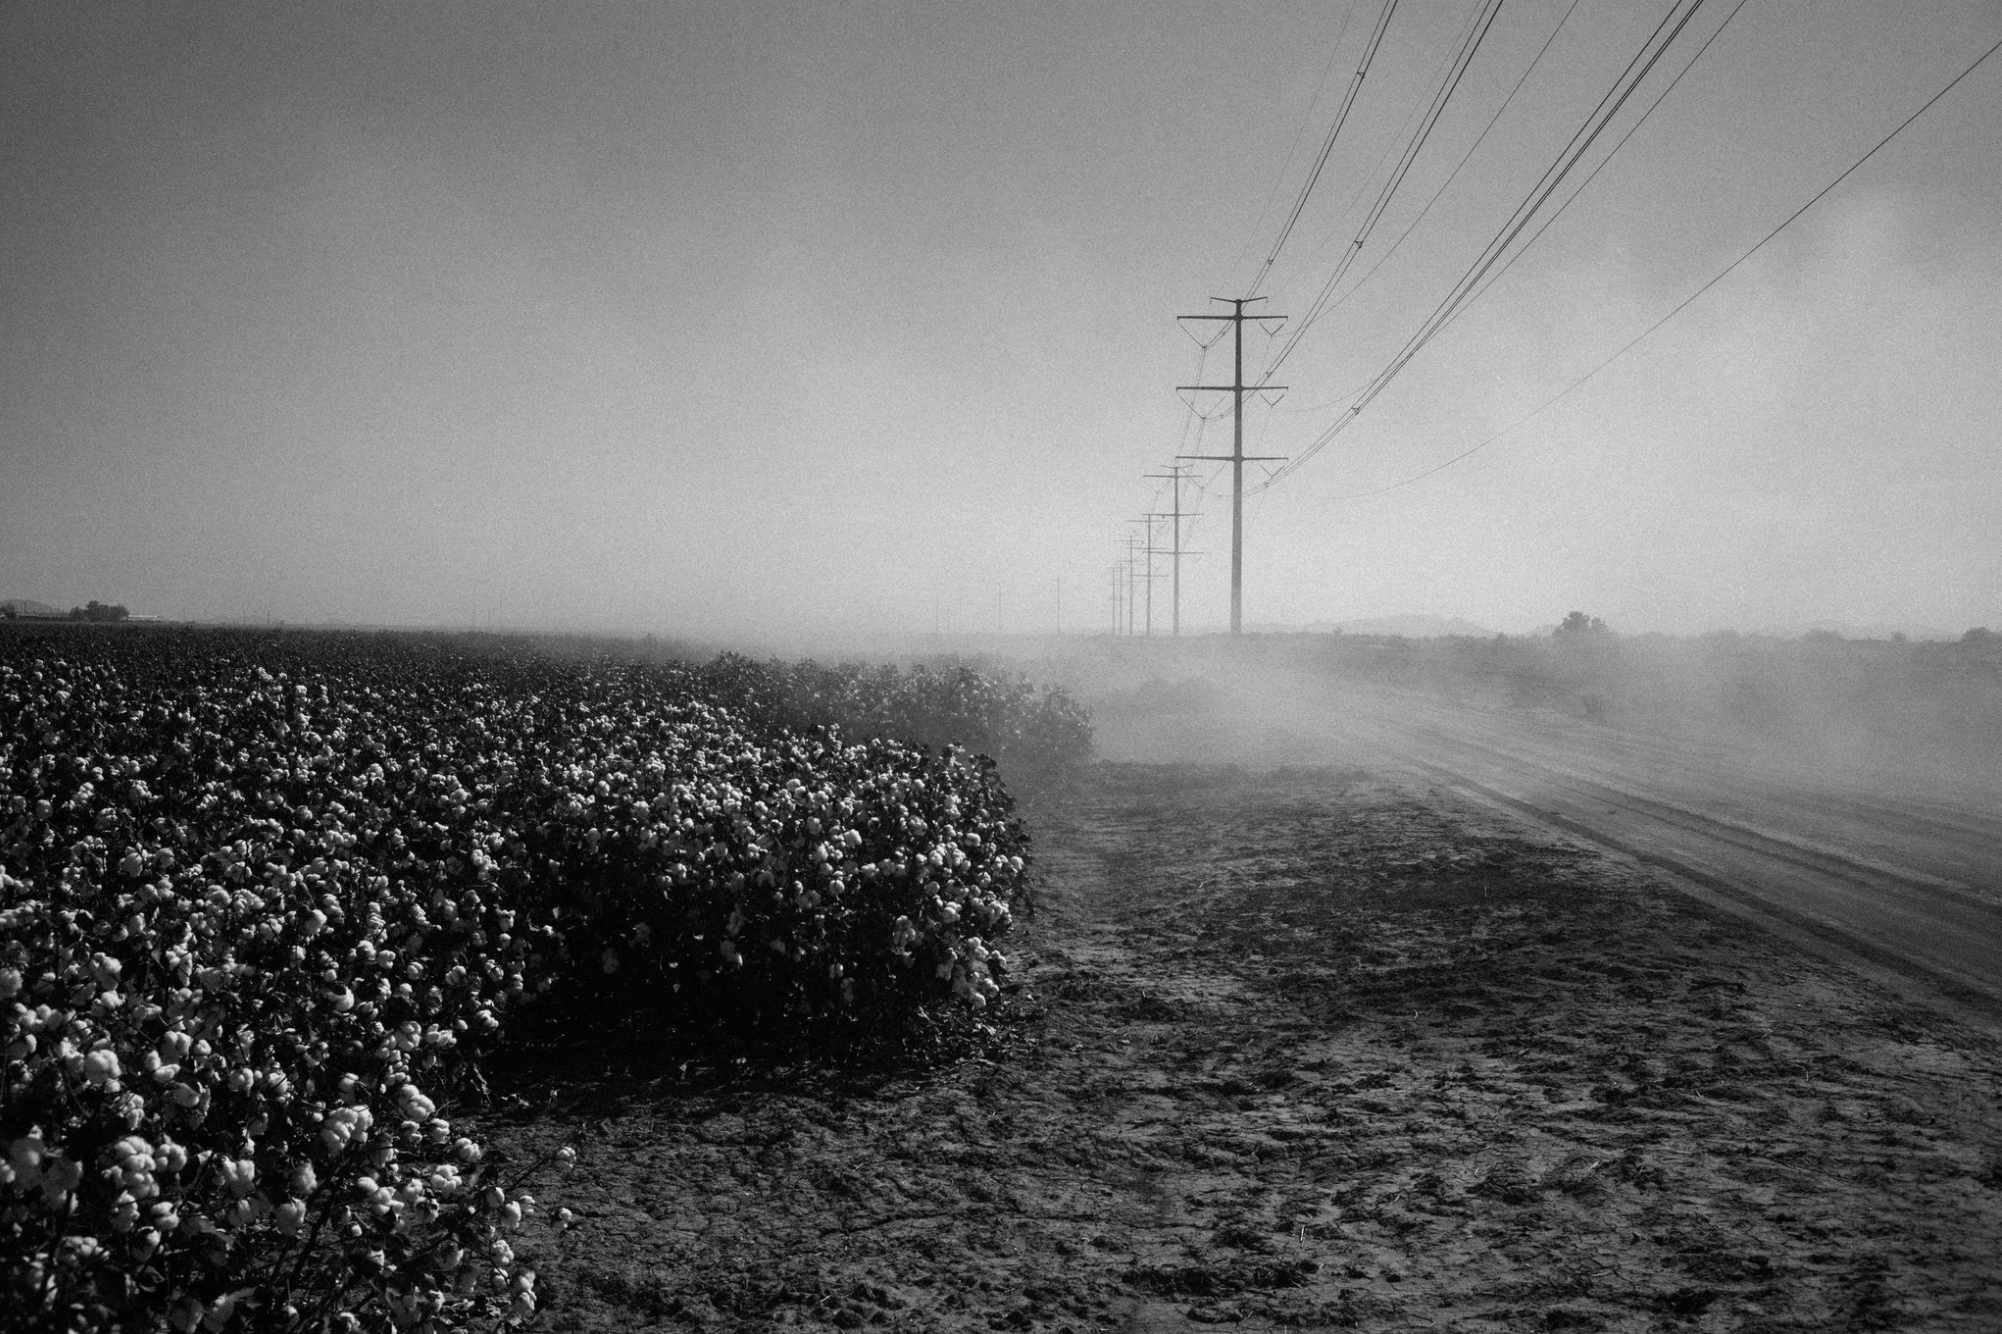 A cotton farm belonging to Dale Button in Stanfield, Arizona. Image by Jošt Franko. United States, 2016.